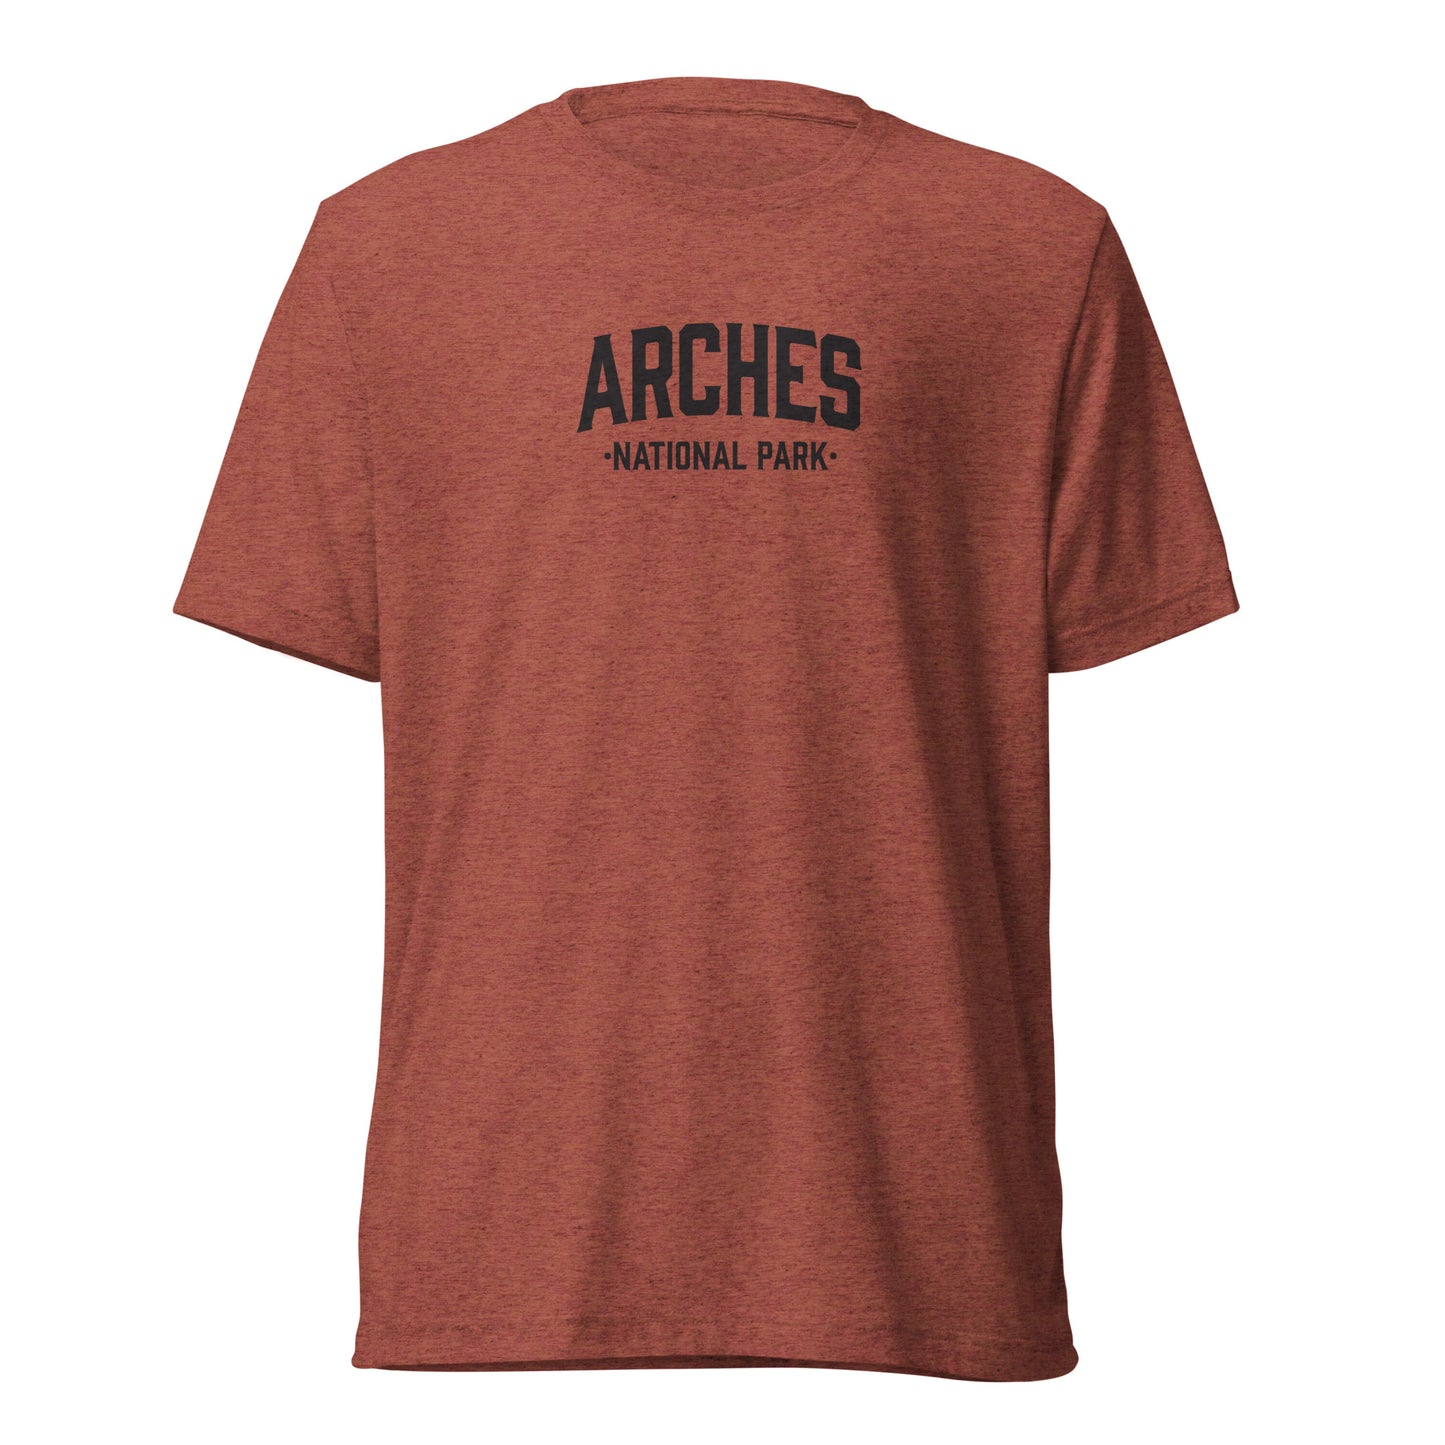 Premium Everyday Arches National Park Tee